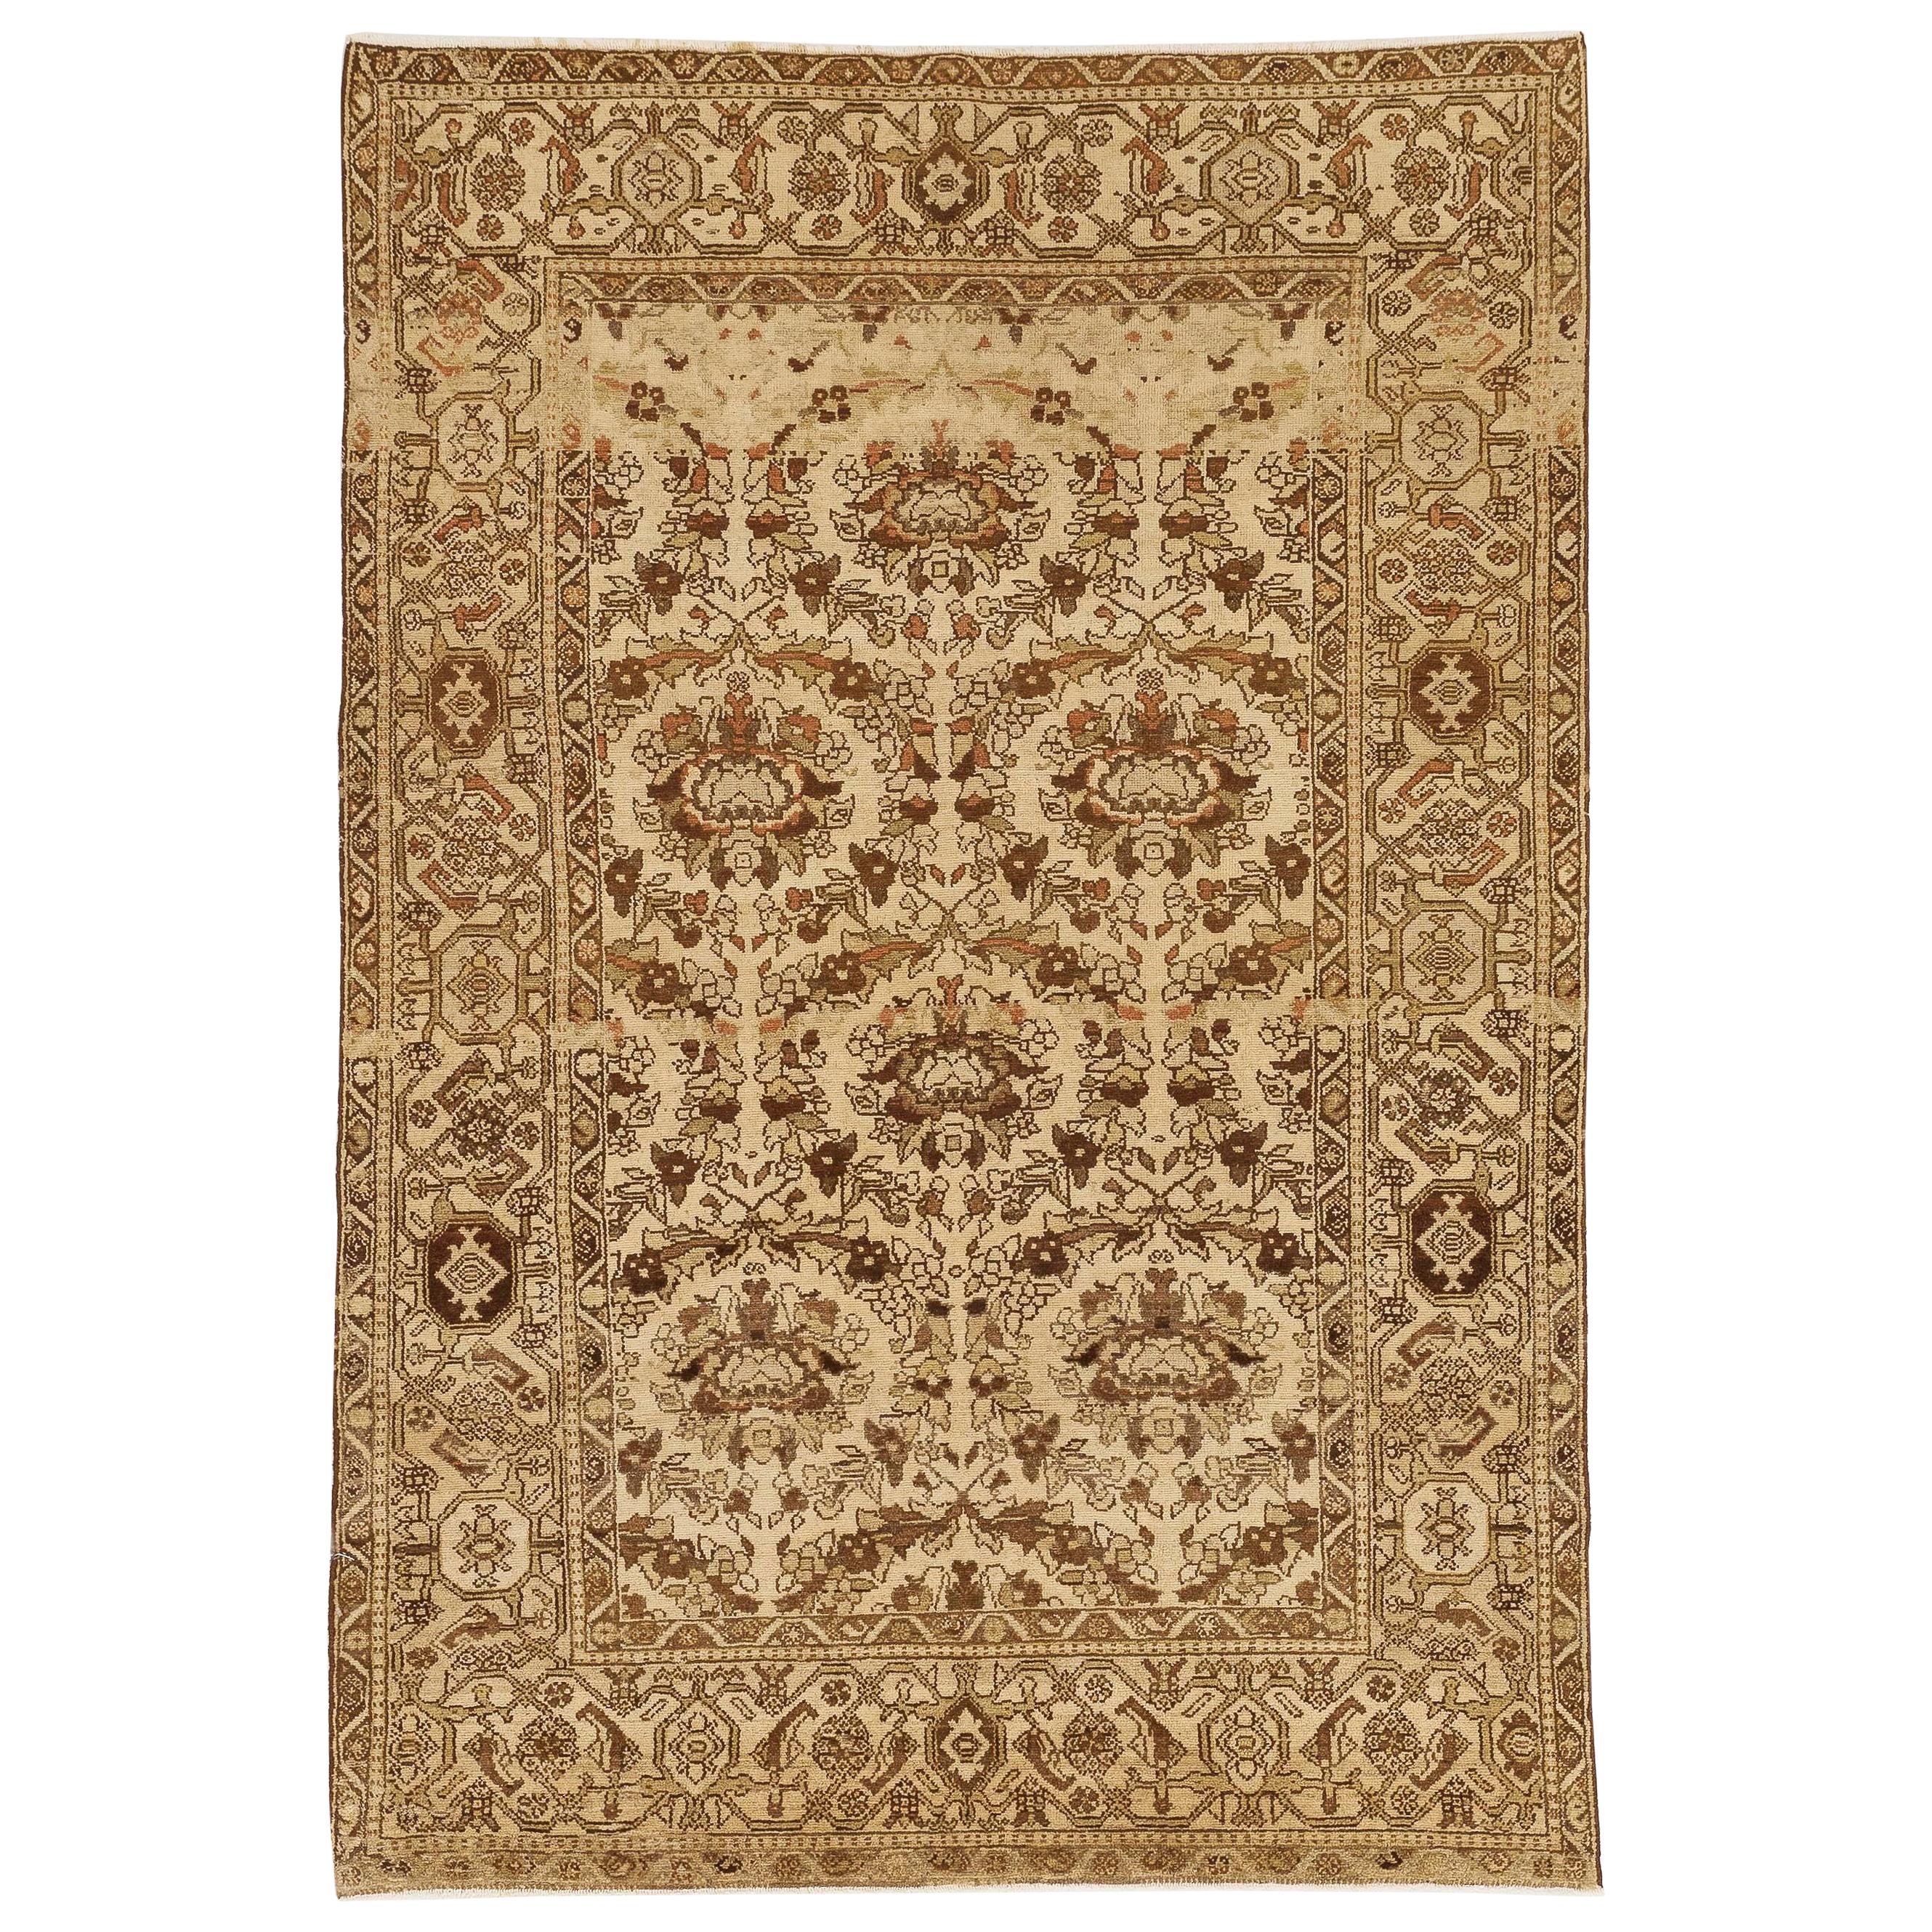 Antique Persian Malayer Rug with Brown & Black Botanical Details on Beige Field For Sale